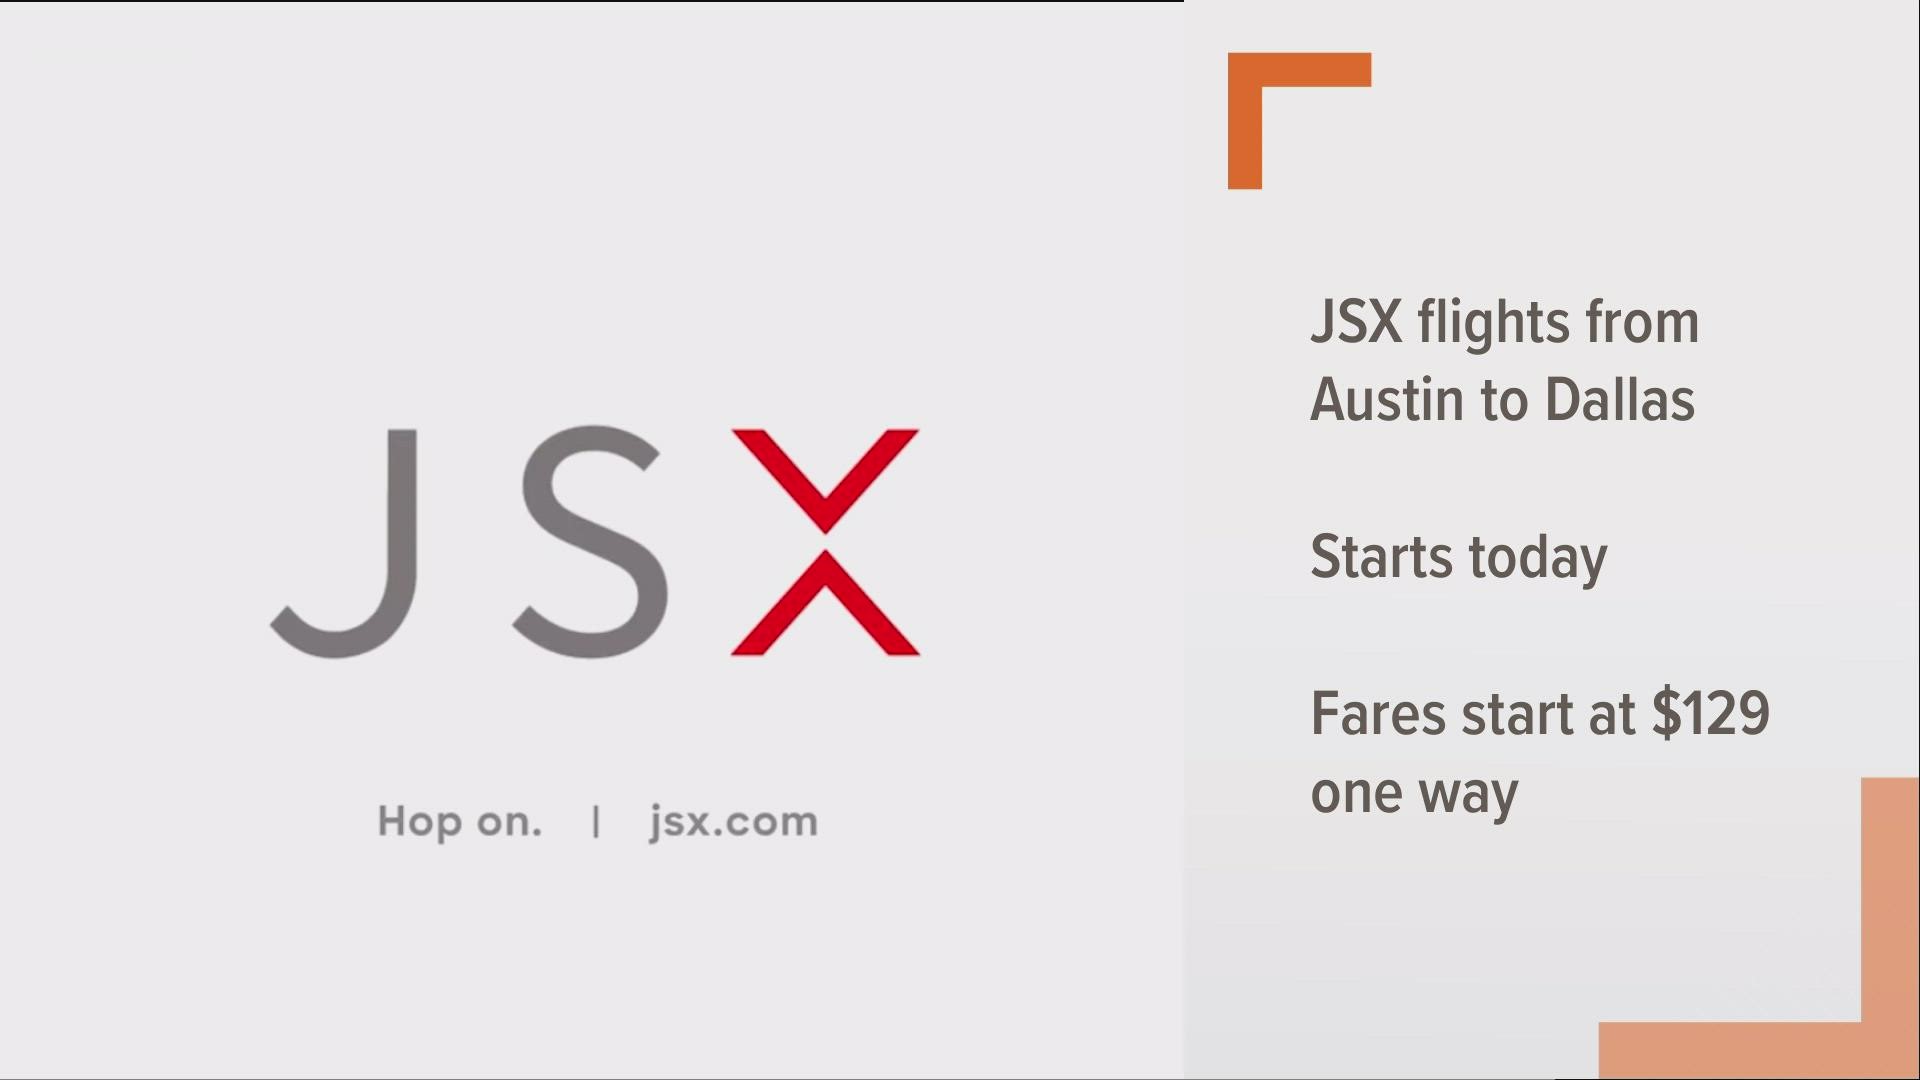 A hop-on jet service is launching new flights from Austin to Dallas. And you don't have to be rich to ride one!